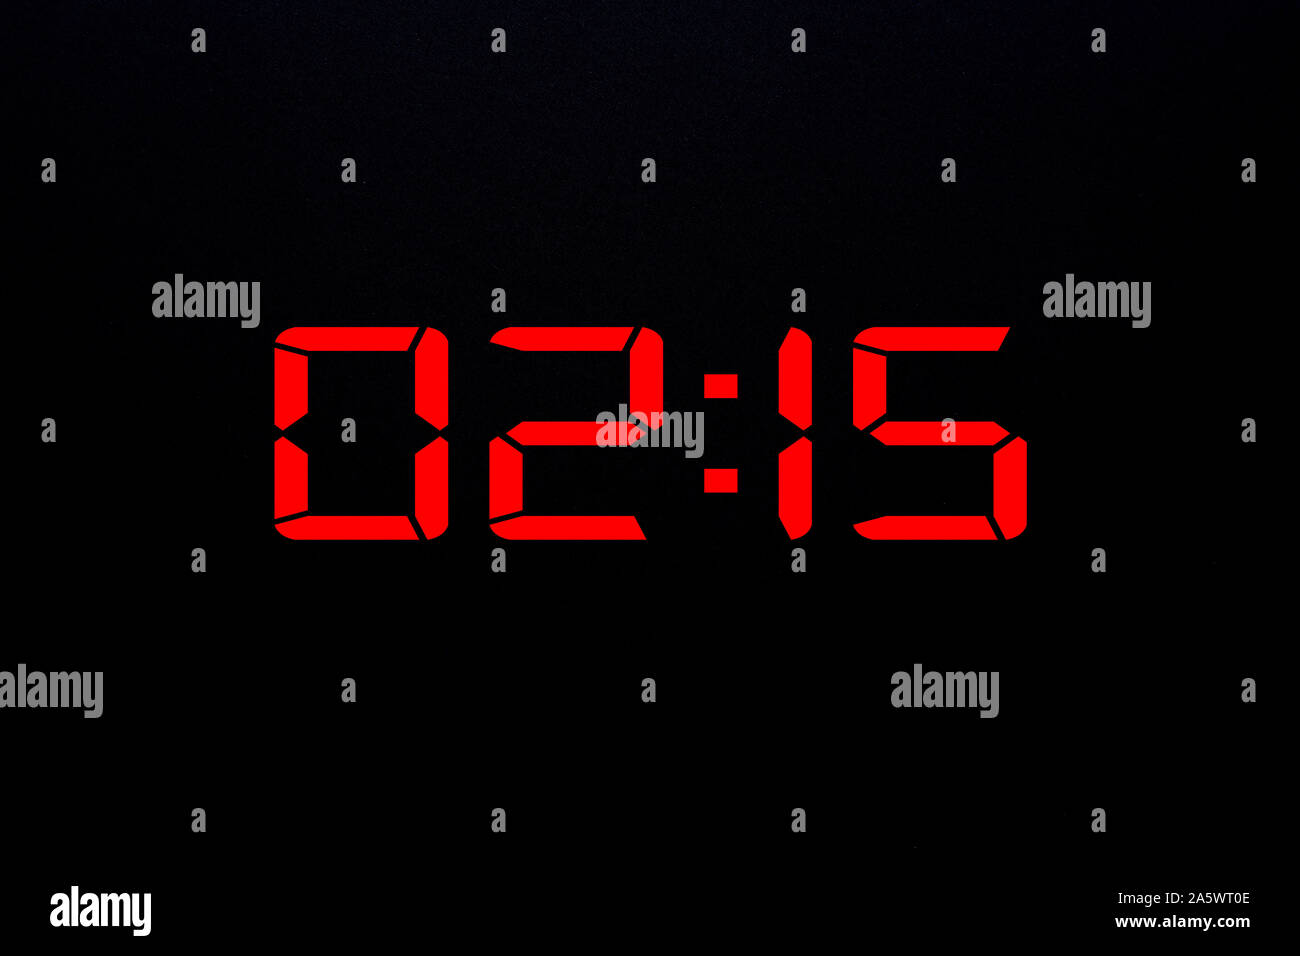 Showing time 02:15 on red led digital clock isolated black background Stock Photo